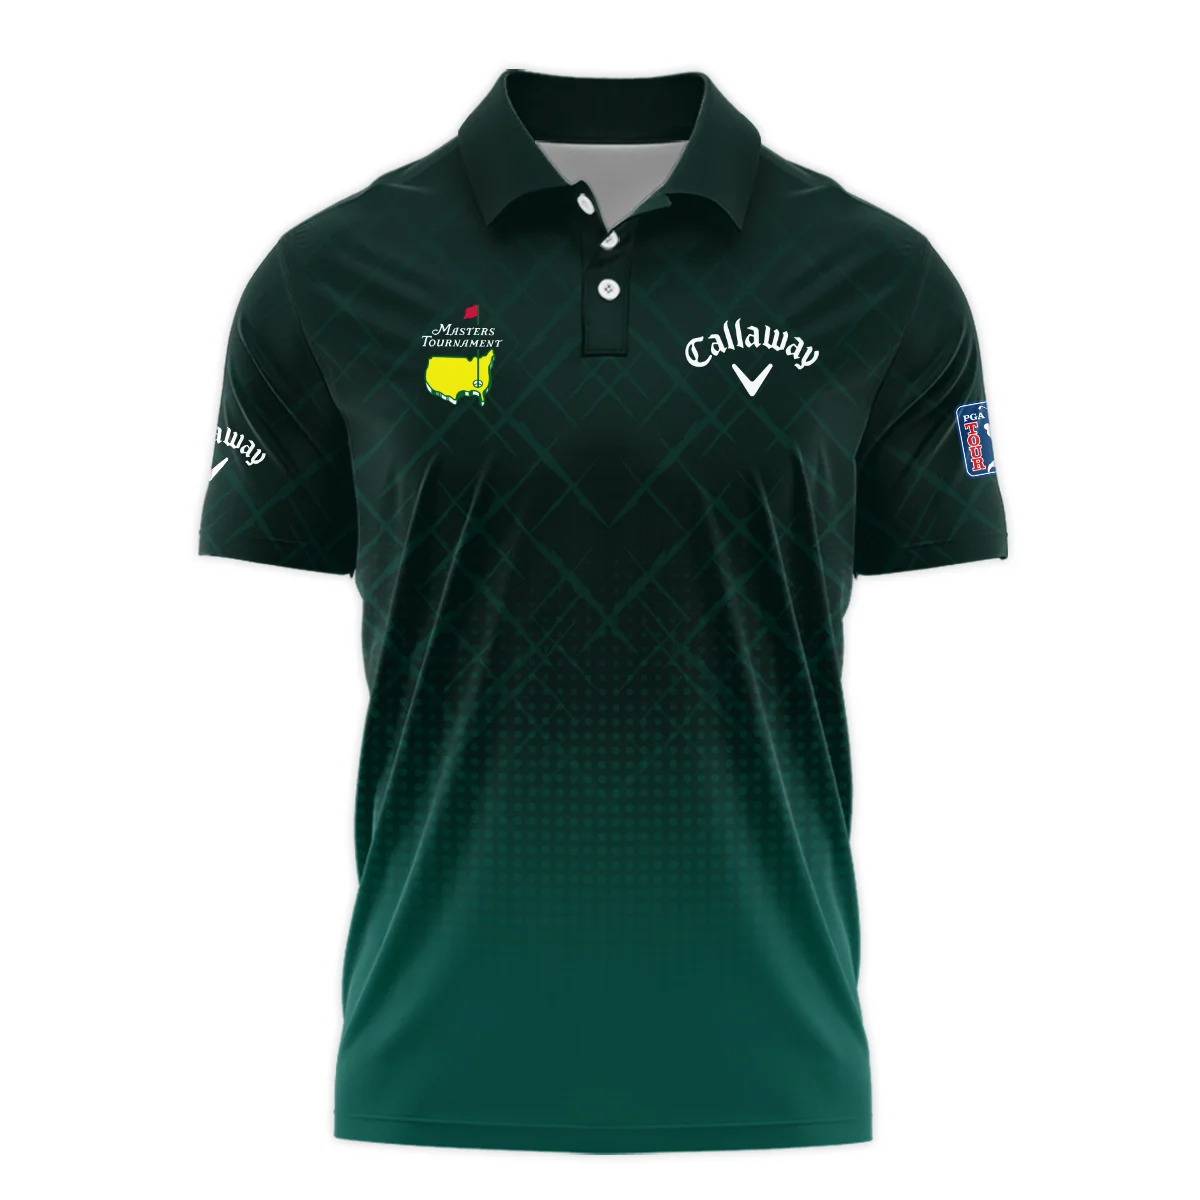 Callaway Masters Tournament Sport Jersey Pattern Dark Green Polo Shirt Style Classic Polo Shirt For Men